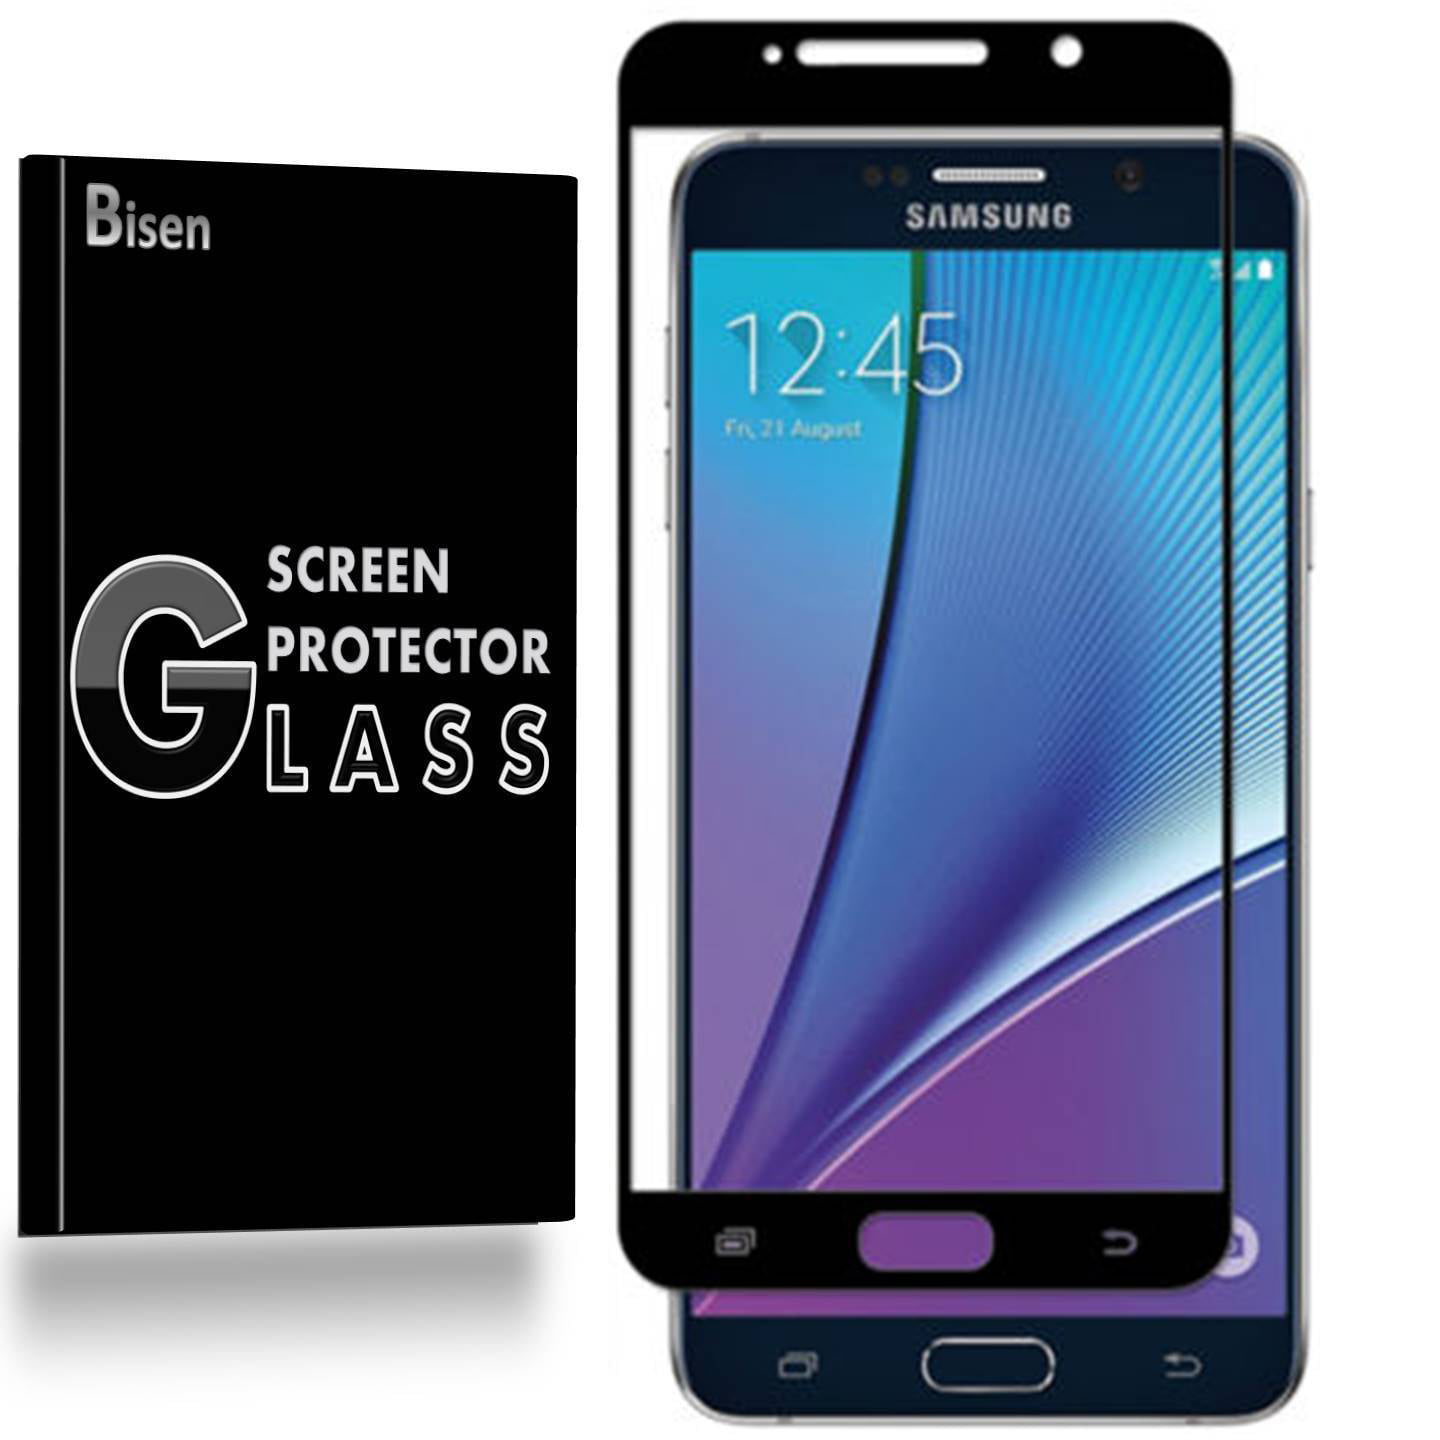 code Televisie kijken Ideaal Samsung Galaxy Note 3 [BISEN] Tempered Glass [Full Coverage] Screen  Protector, Edge-To-Edge Protect, Anti-Scratch, Anti-Shock, Shatterproof,  Bubble Free - Walmart.com